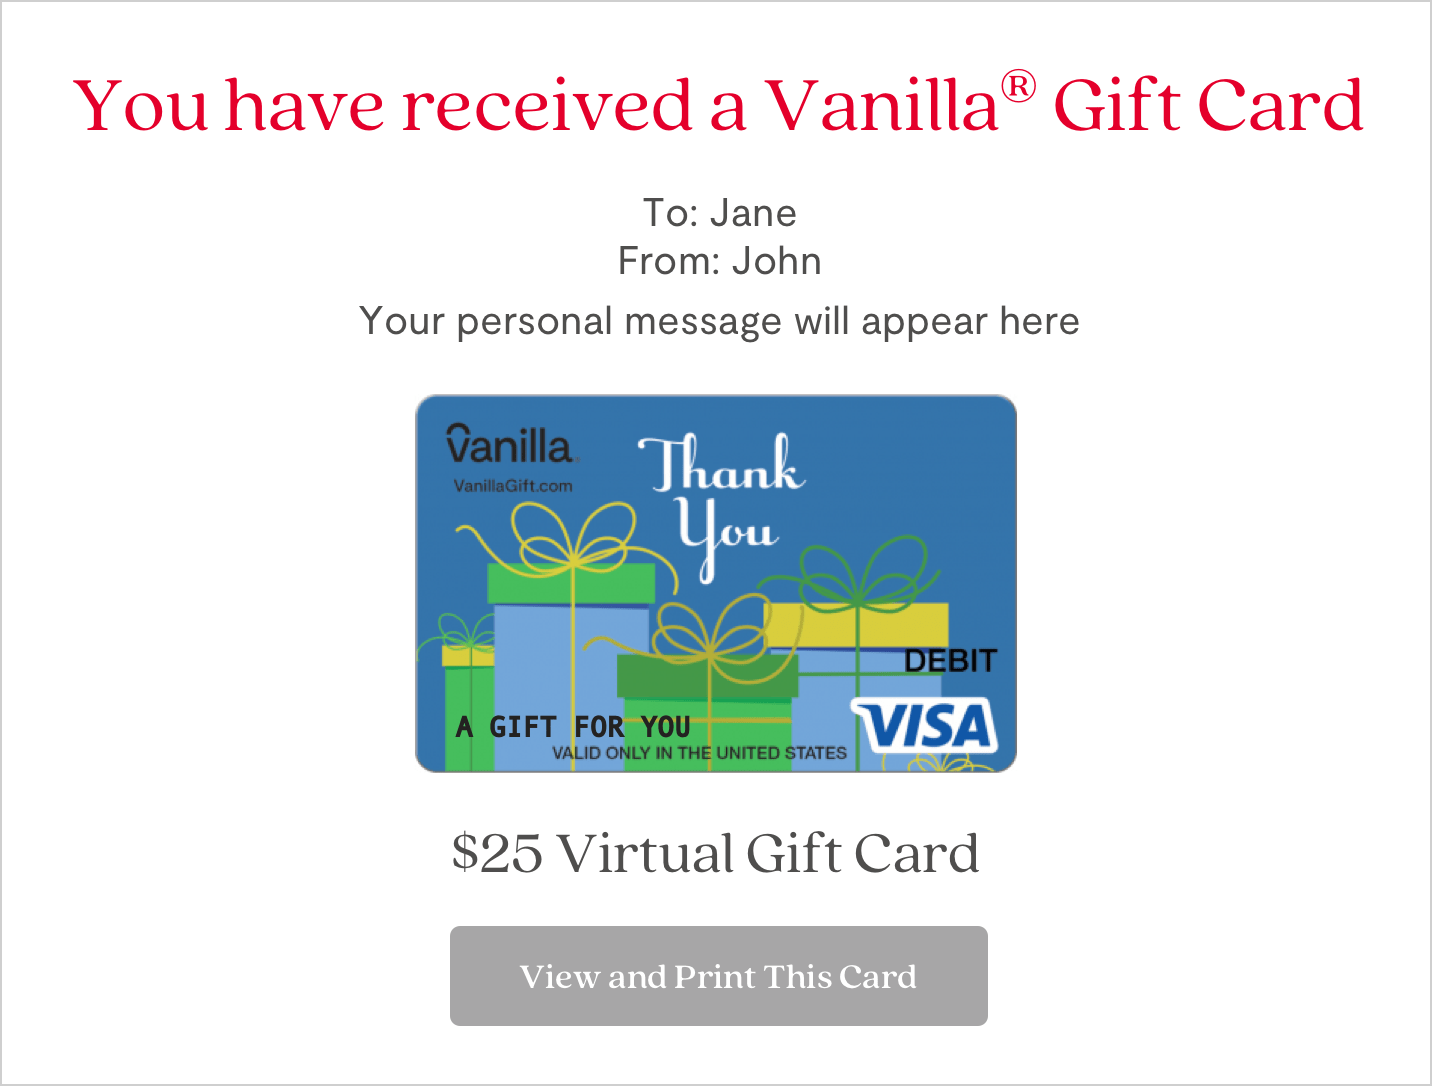 A vanilla gift card is shown on the screen